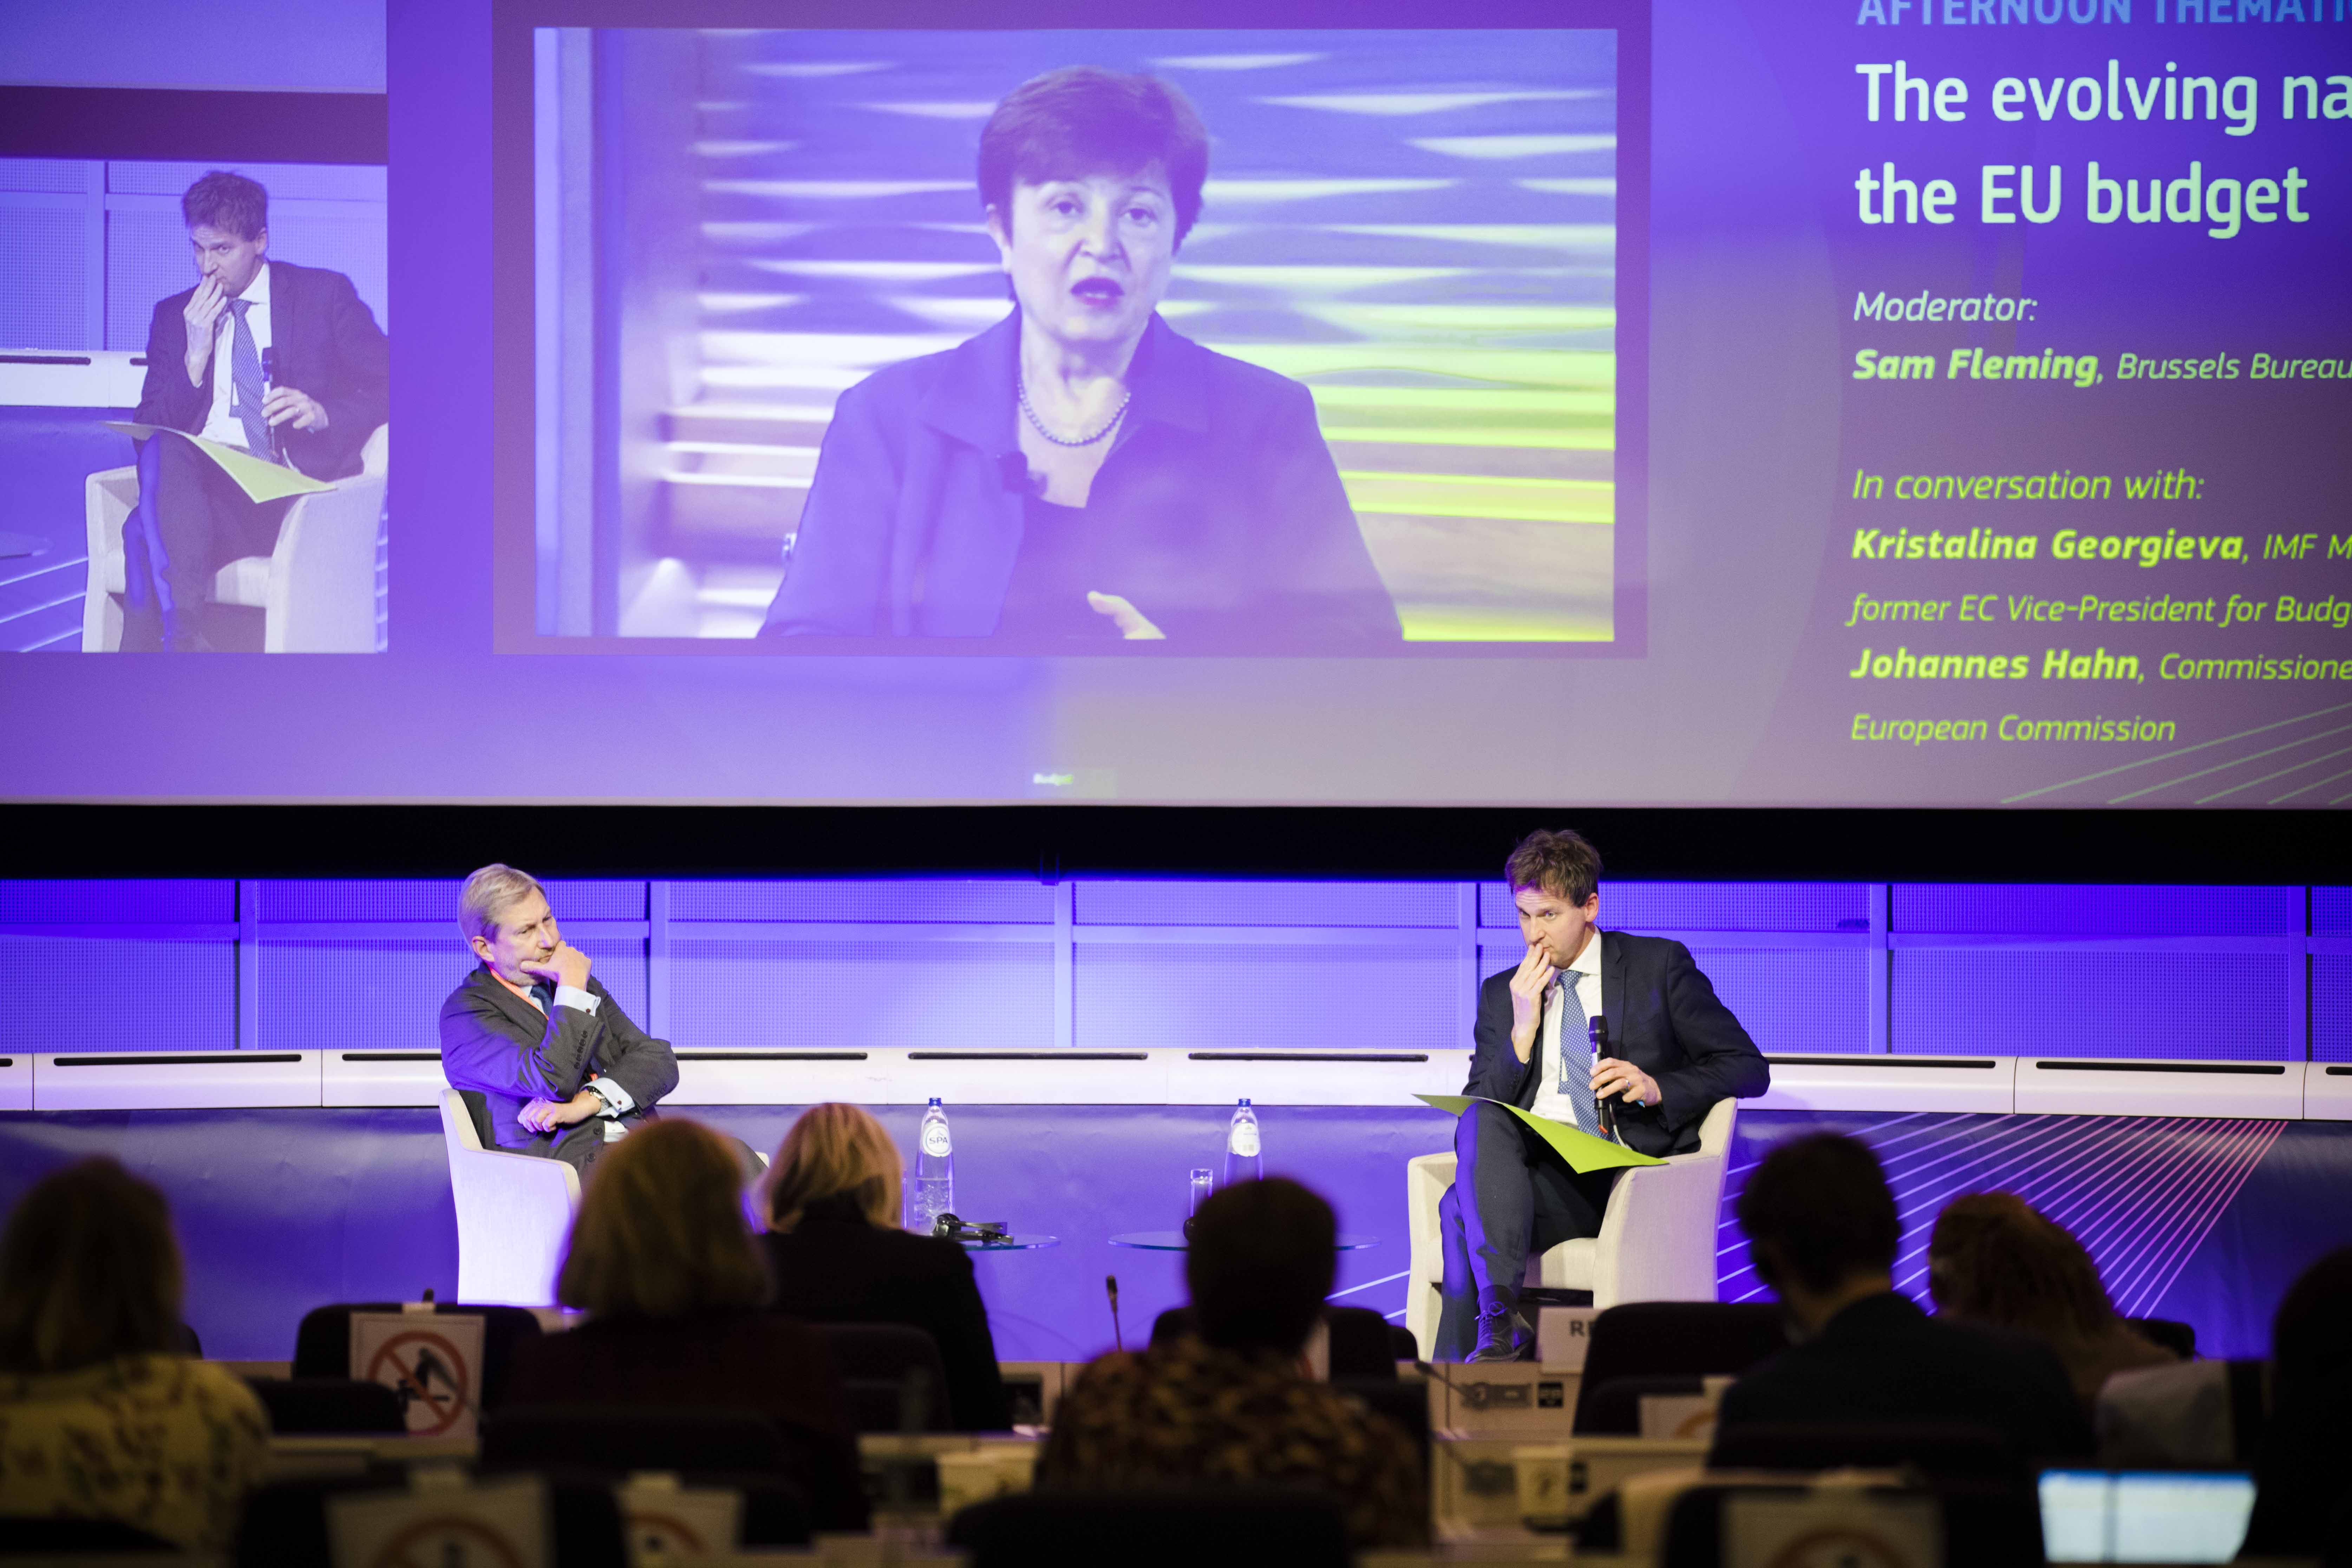 Kristalina Georgieva, Managing Director IMF on the screen speaking, below showing the satge  with Commissioner Johannes Hahn on the left and moderator Sam Fleming (Brussels Bureau Chief, Financial Times) on the right